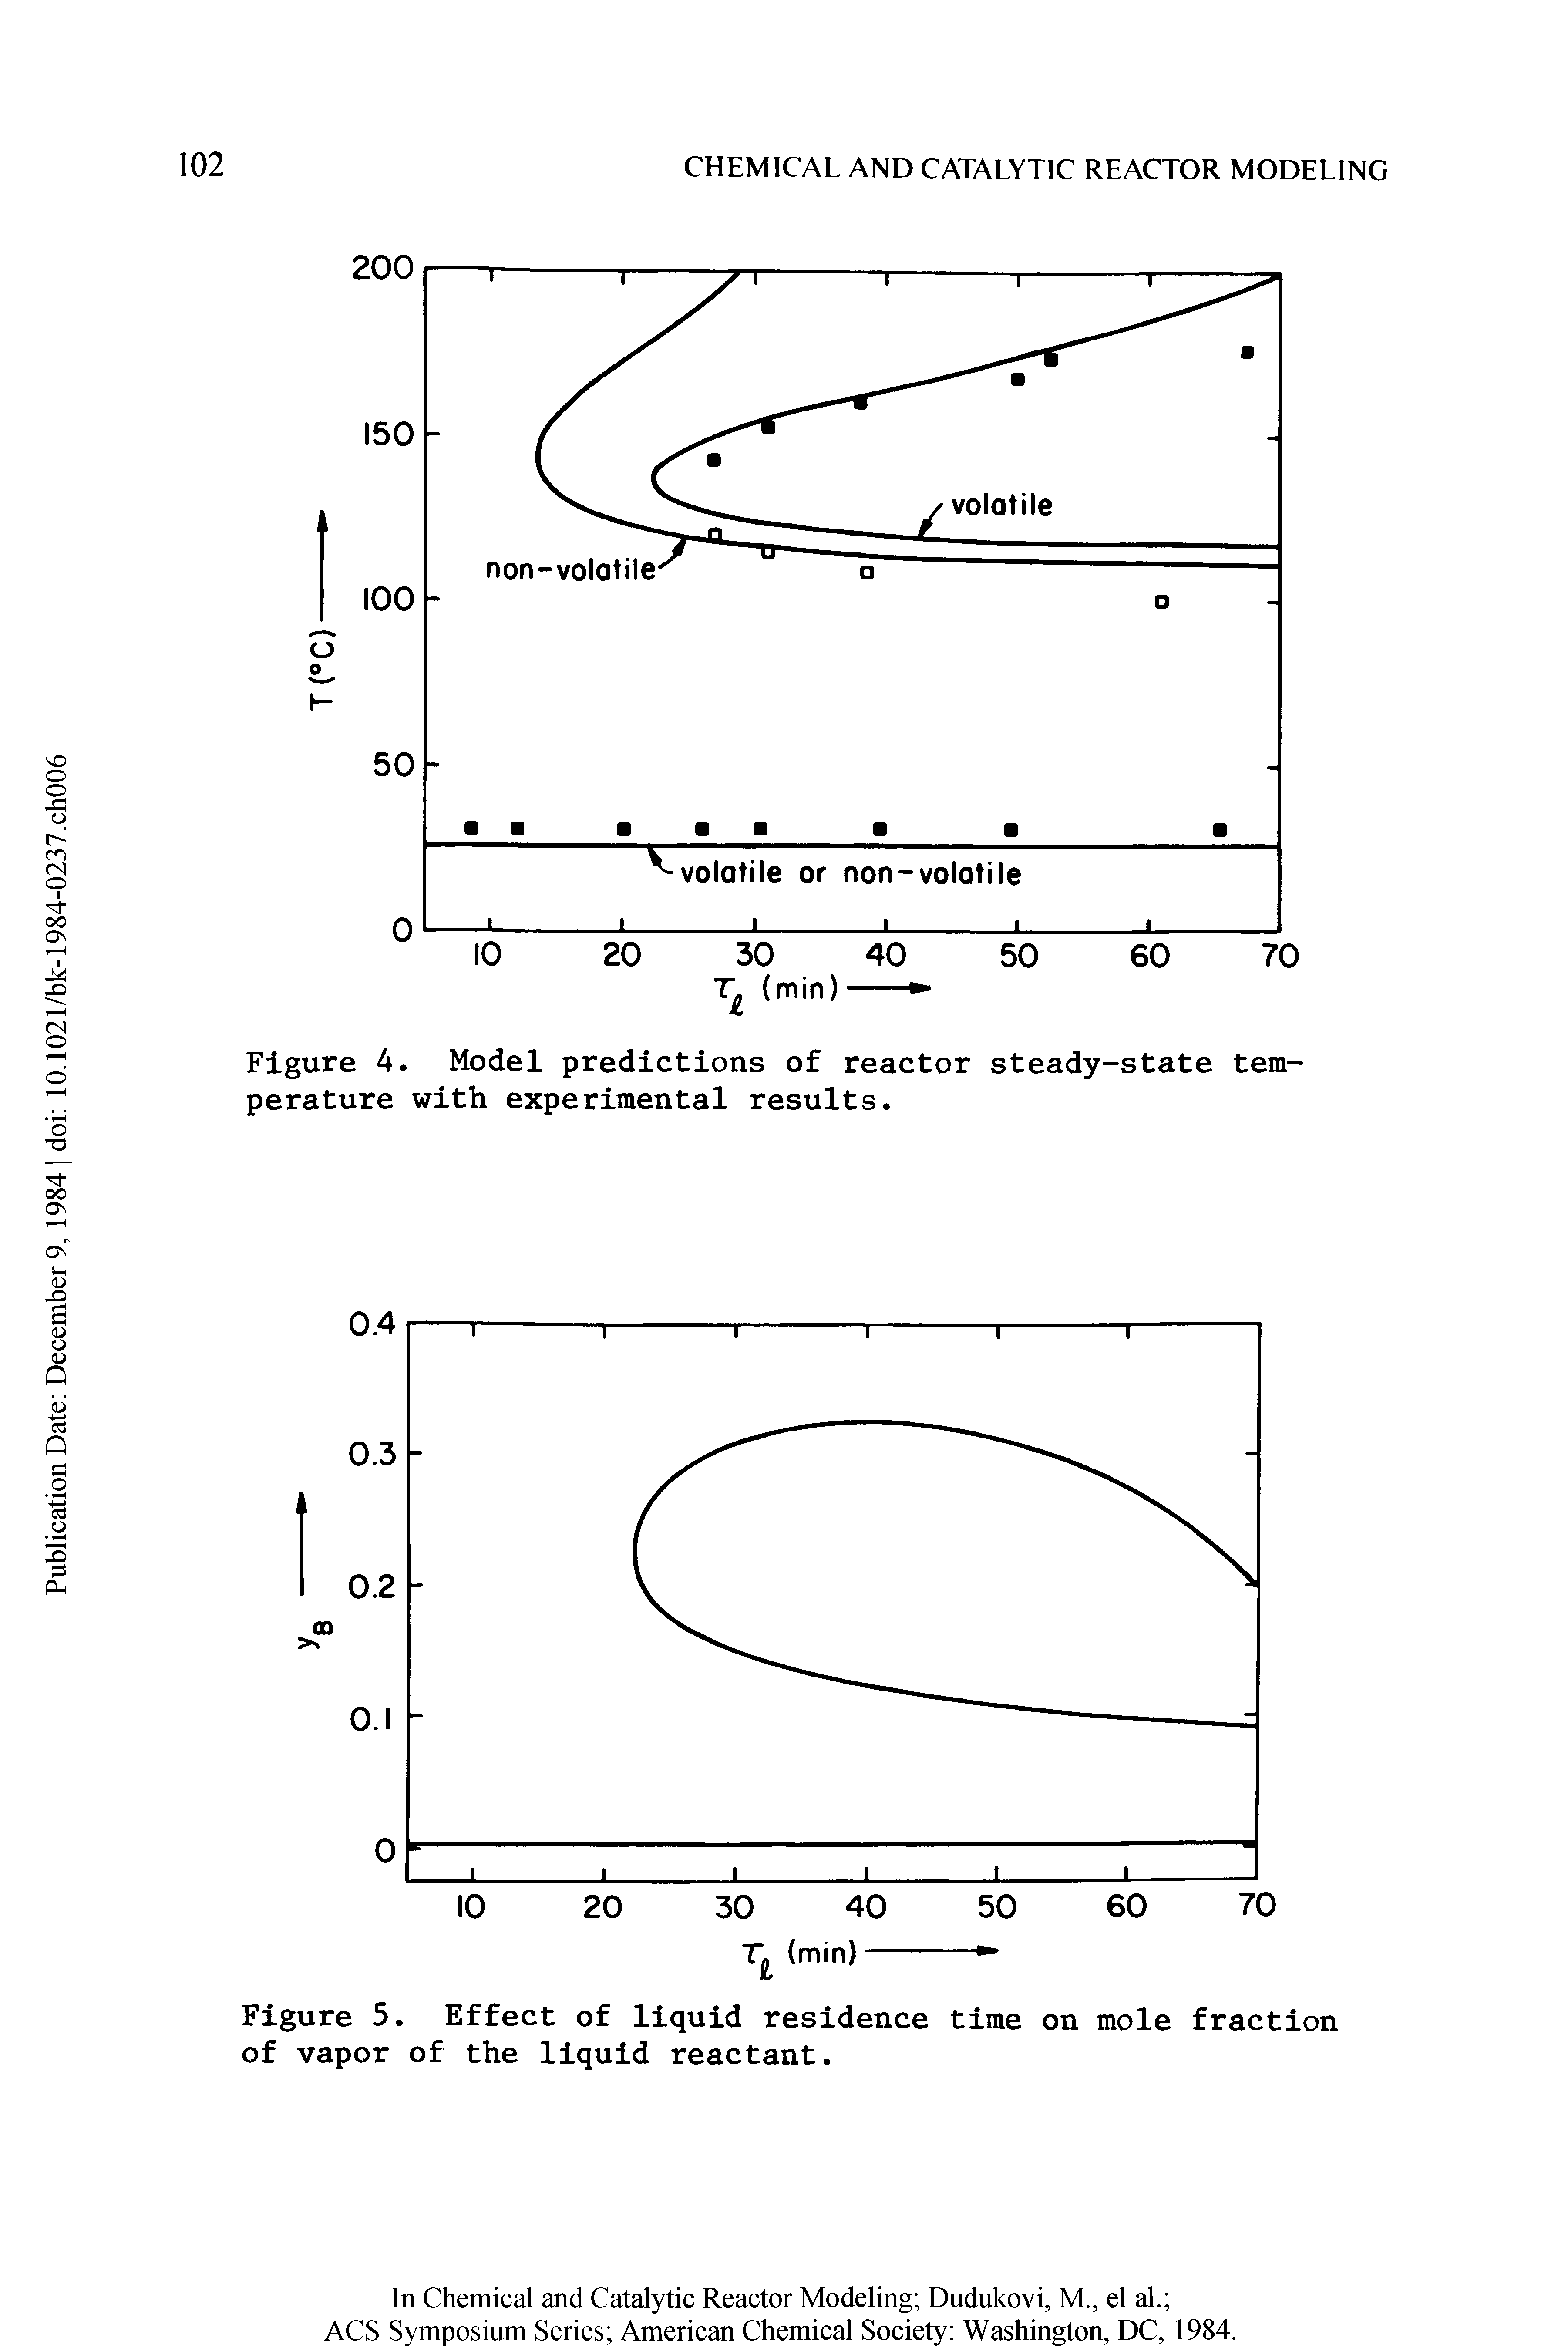 Figure 4. Model predictions of reactor steady-state temperature with experimental results.